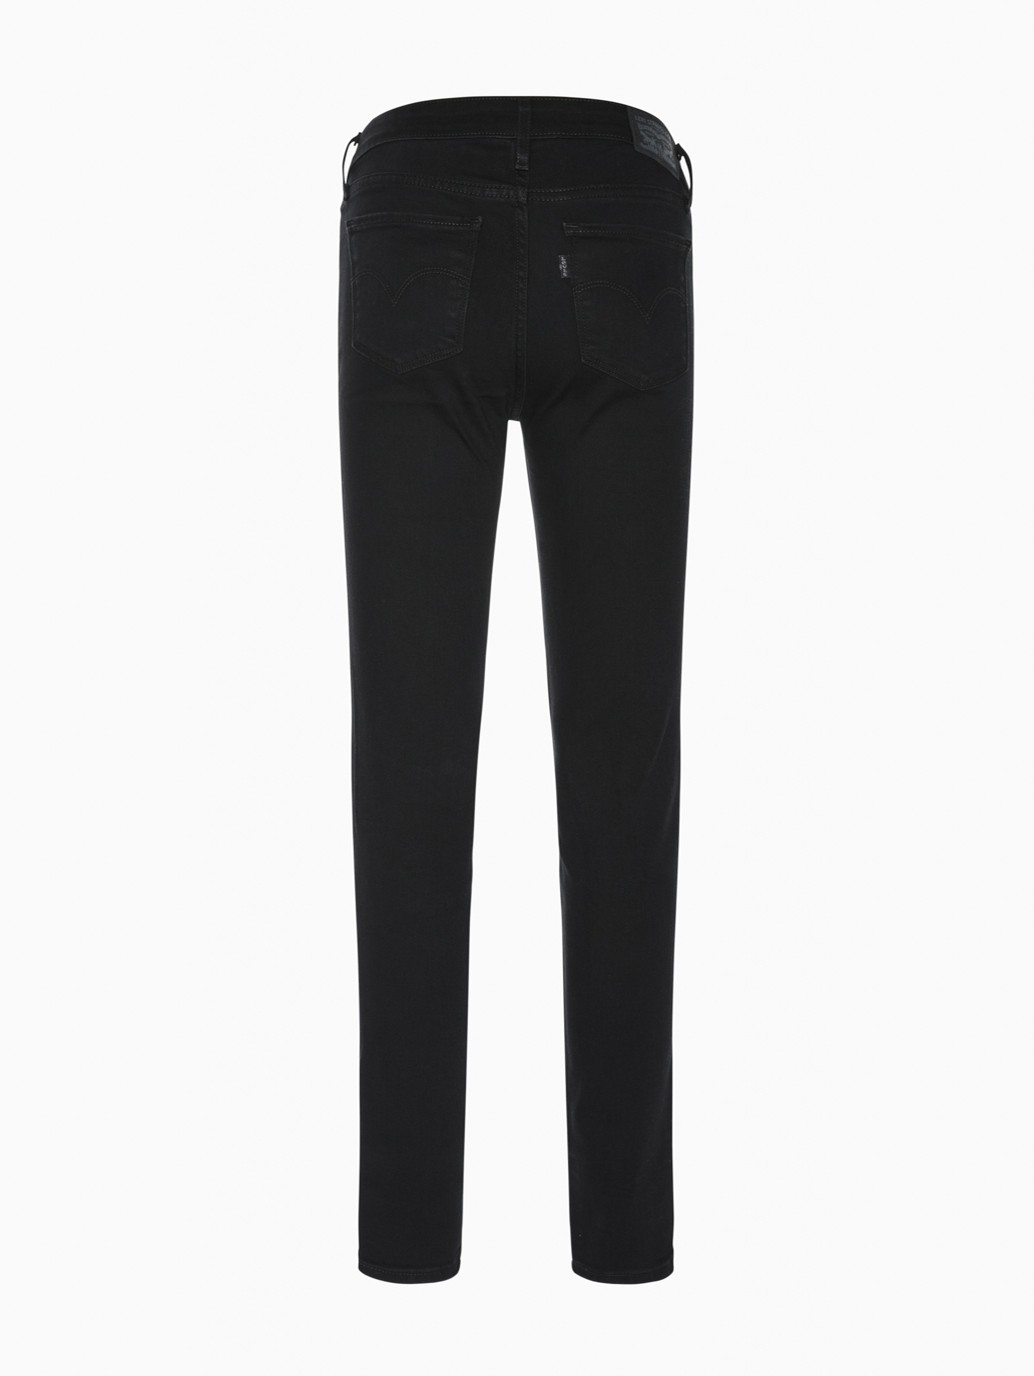 Buy 711 Skinny Jeans | Levi's® Official Online Store MY